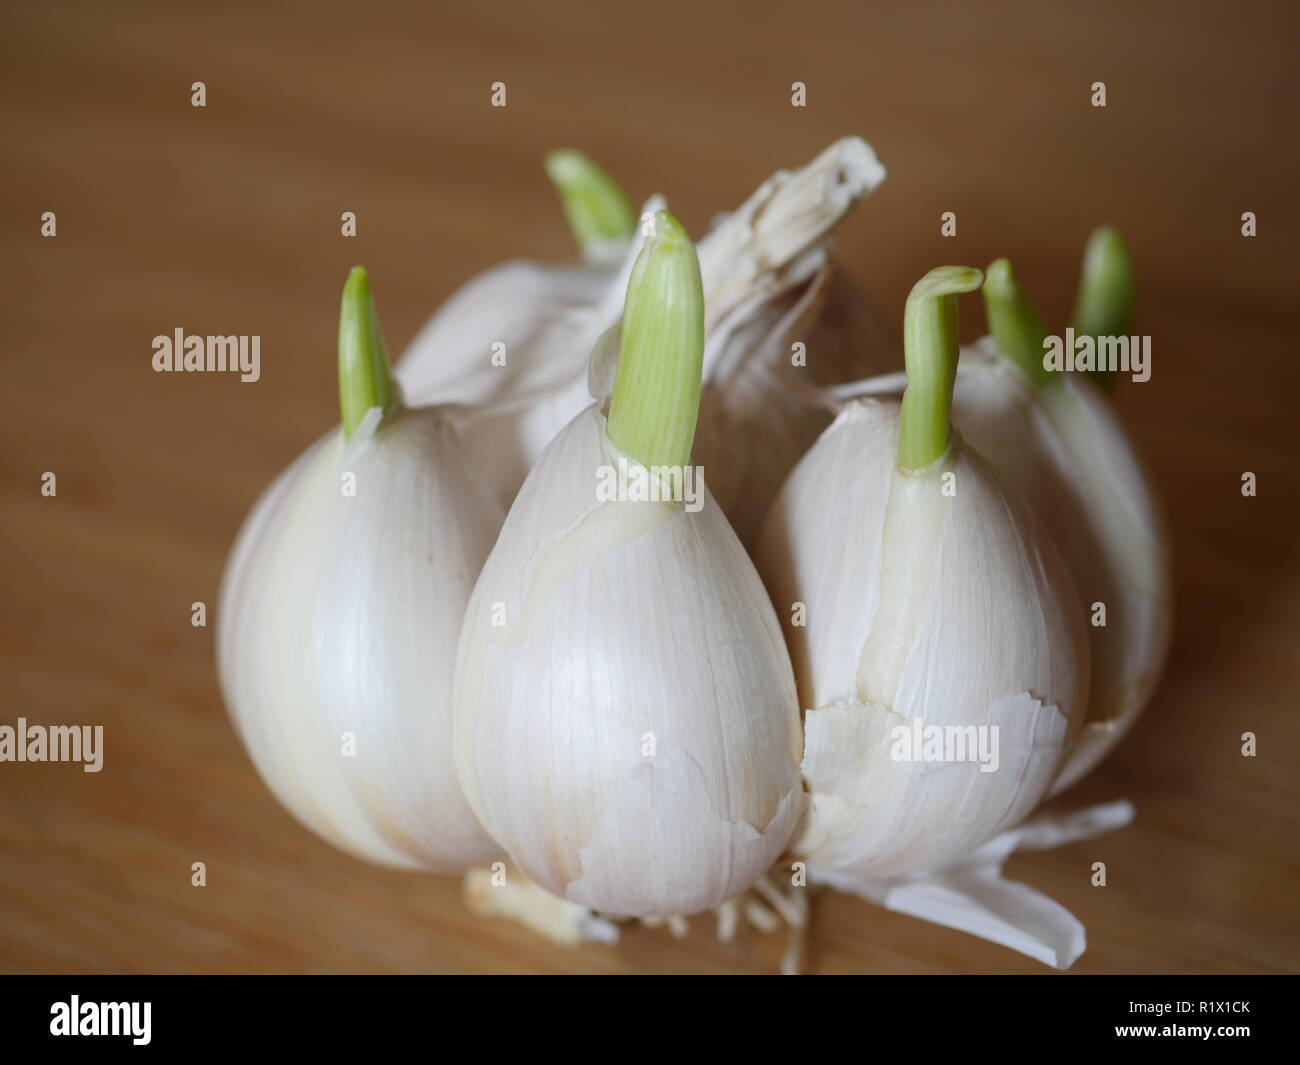 germinating garlic on the background of cutting board Stock Photo